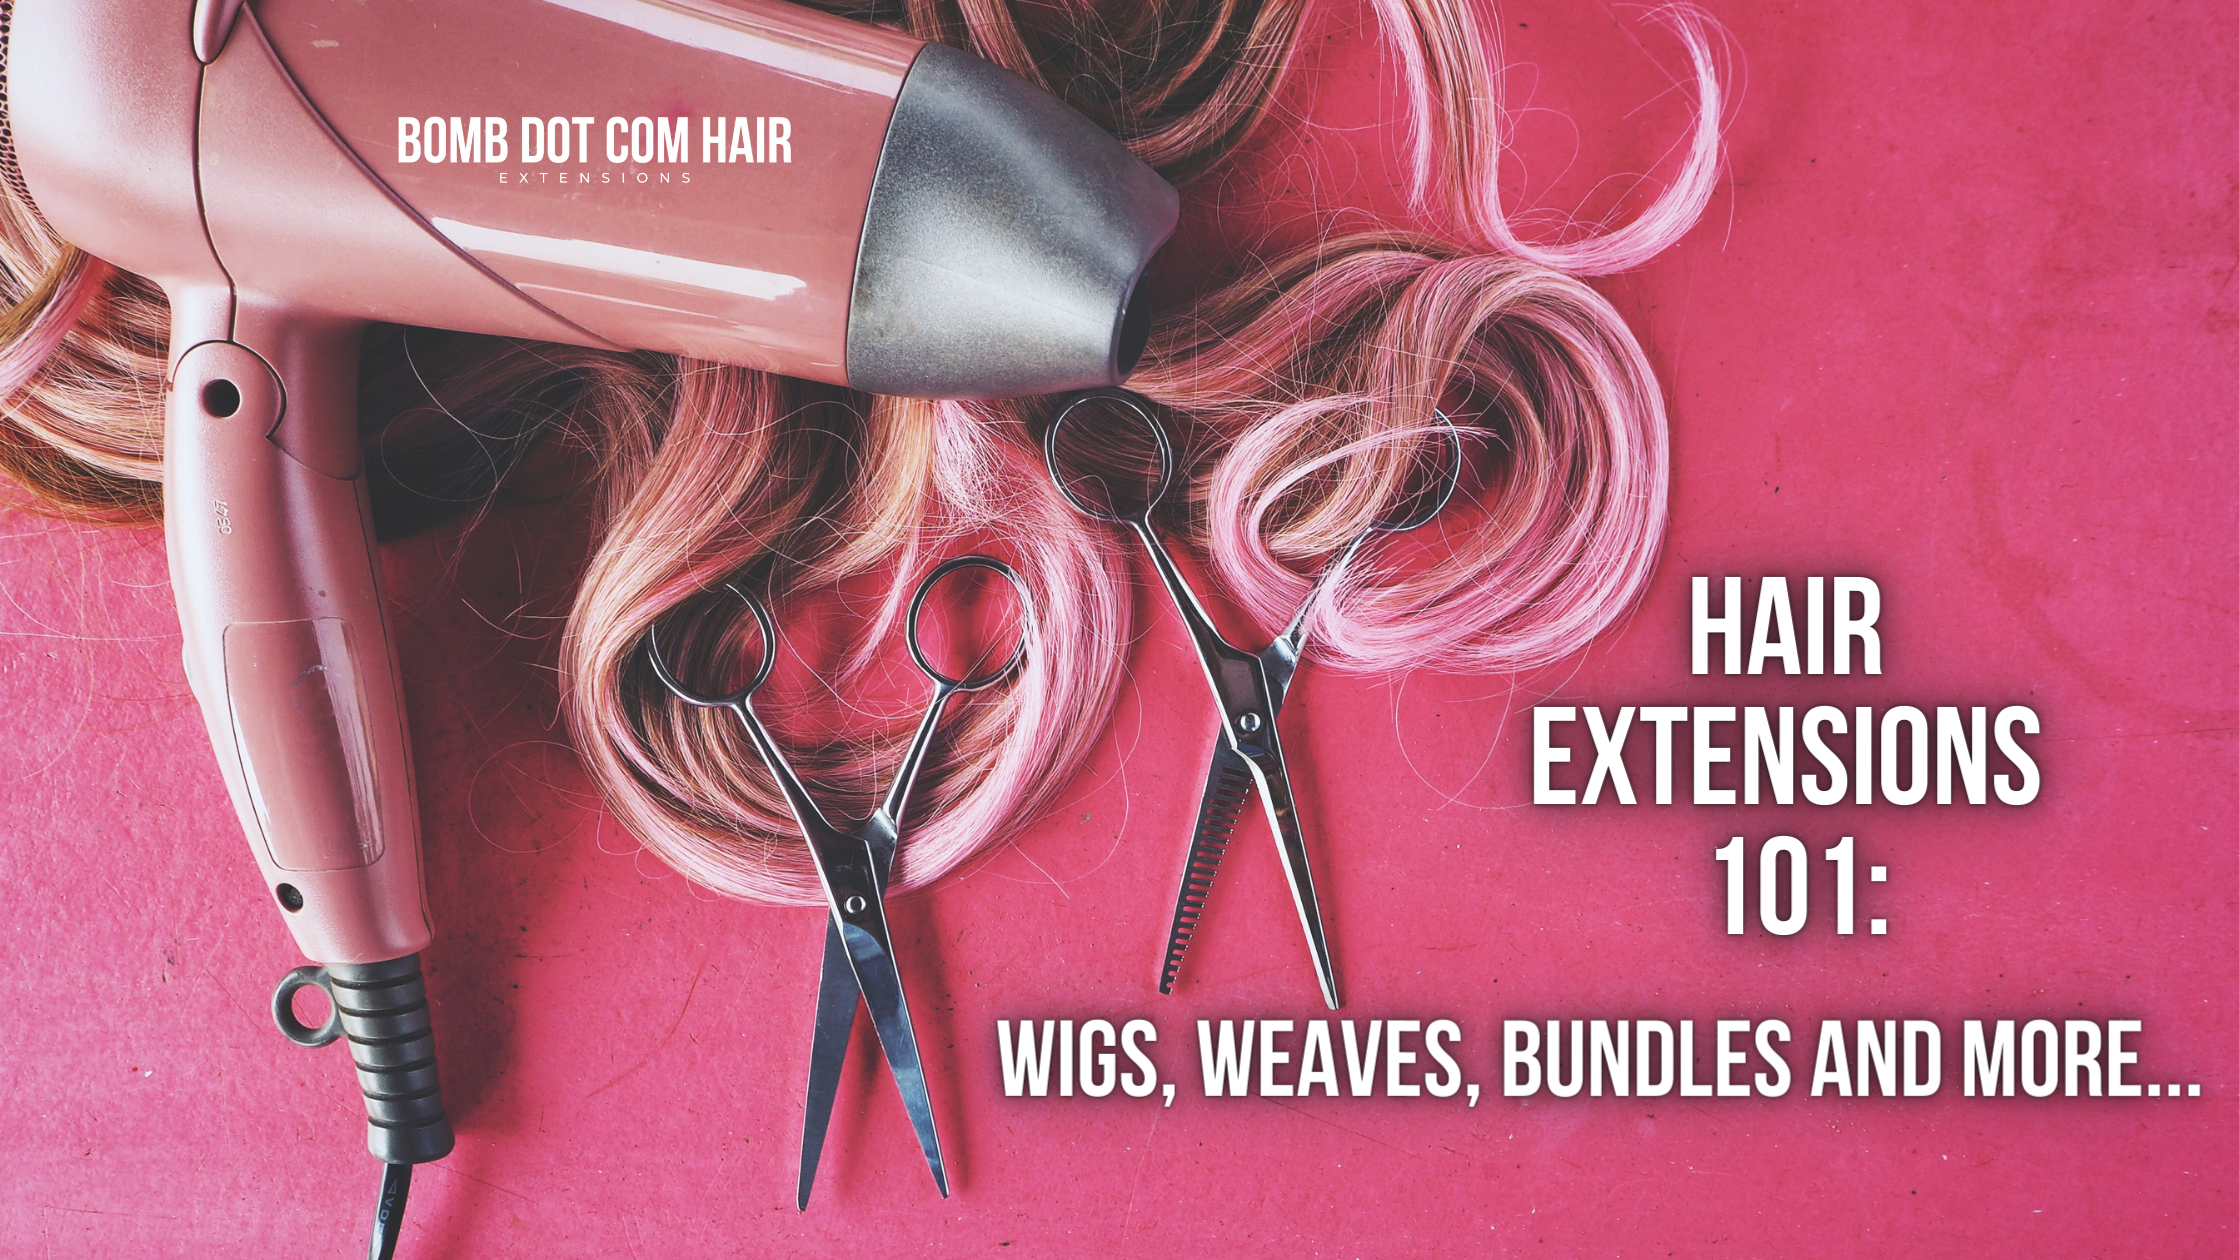 Preparing Your Hair For a Sew-In Weave and Tying A Needle 